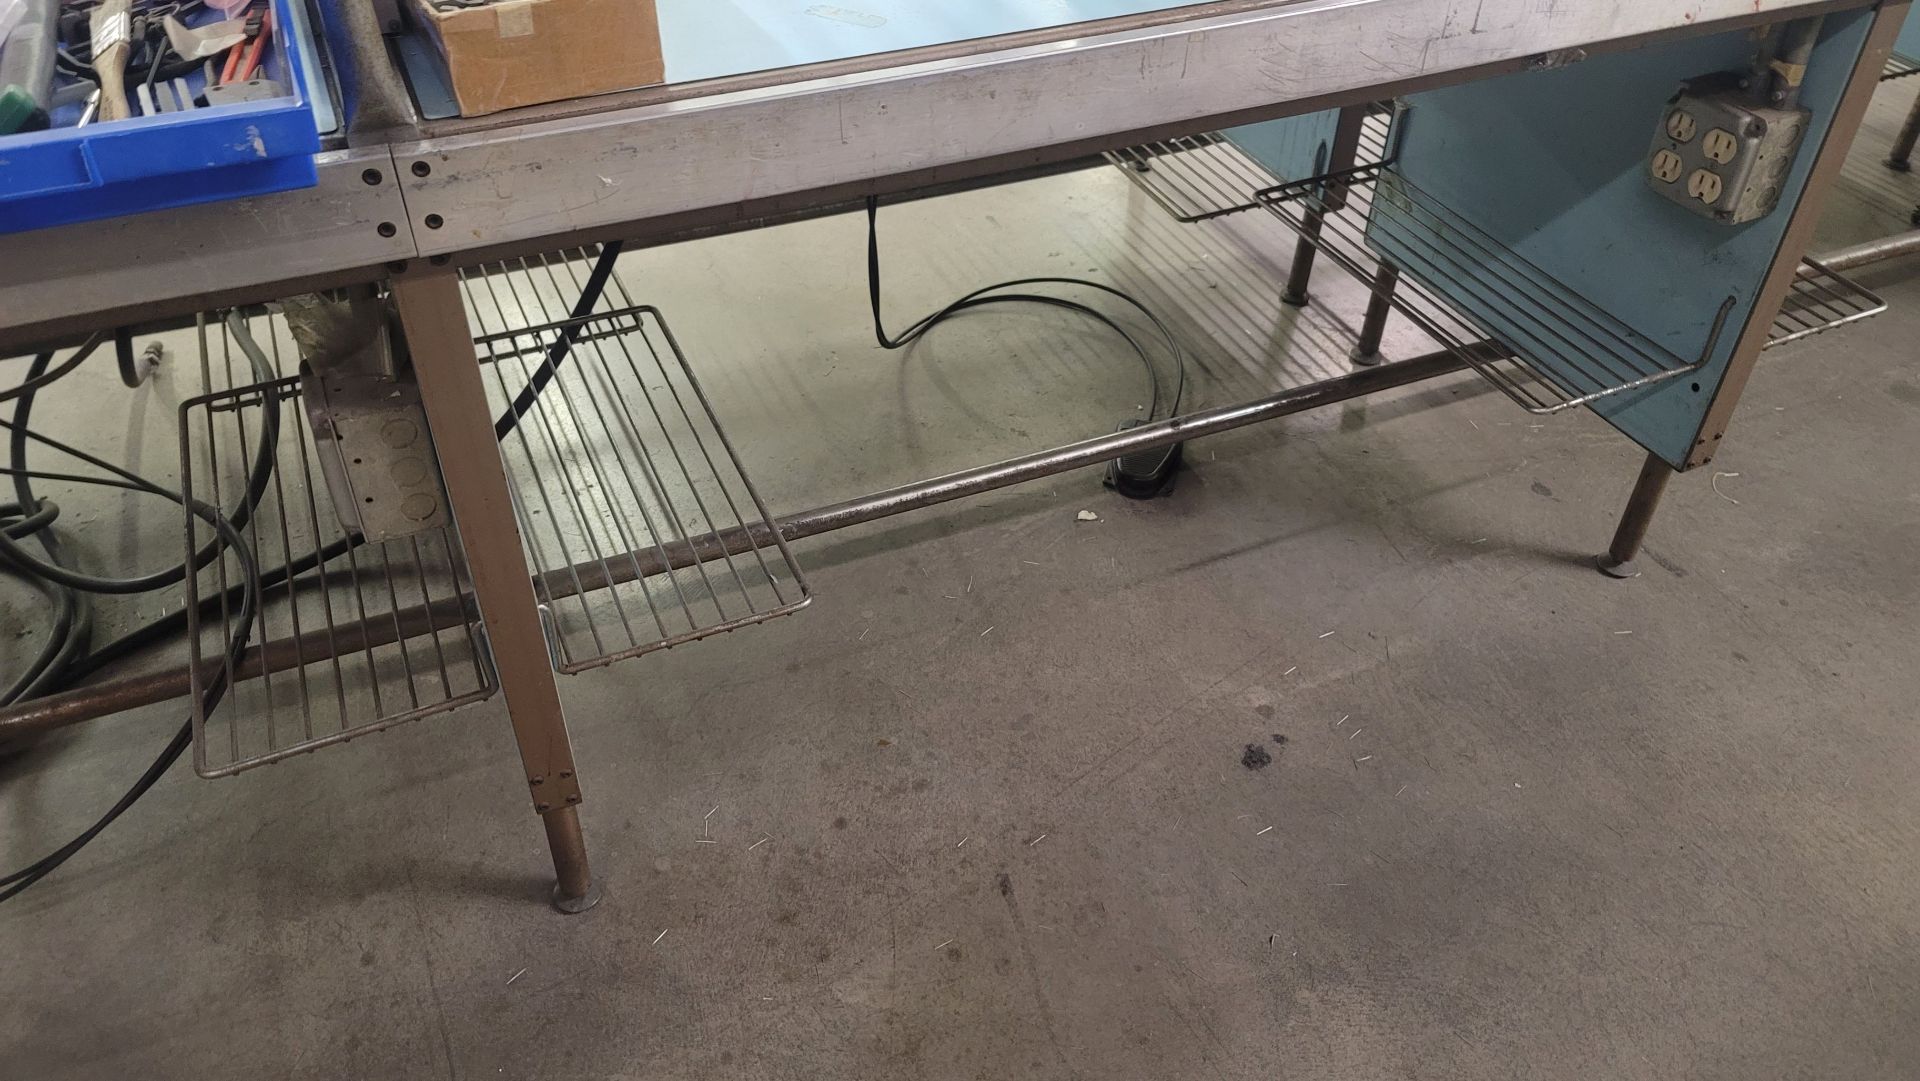 5-STATION ASSEMBLY TABLE W/ WIRE TOP SHELF, W/ POWER, 20" X 24" X 30" HT, NO CONTENTS - Image 2 of 3